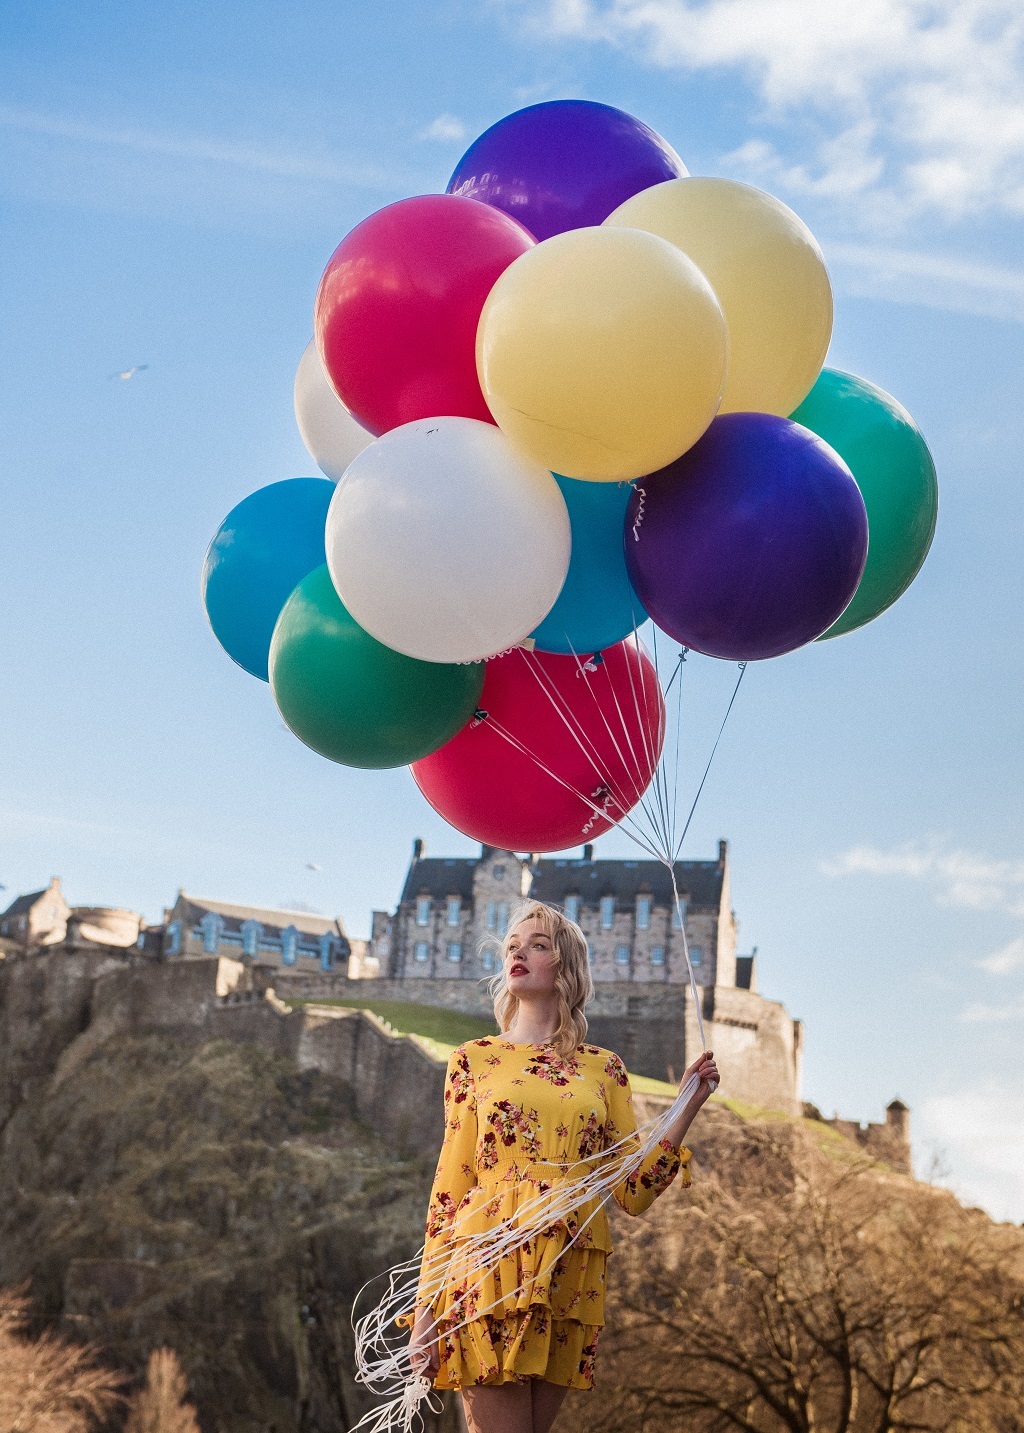 Life &amp; Style 2018 will take place at the Royal Society of Edinburgh